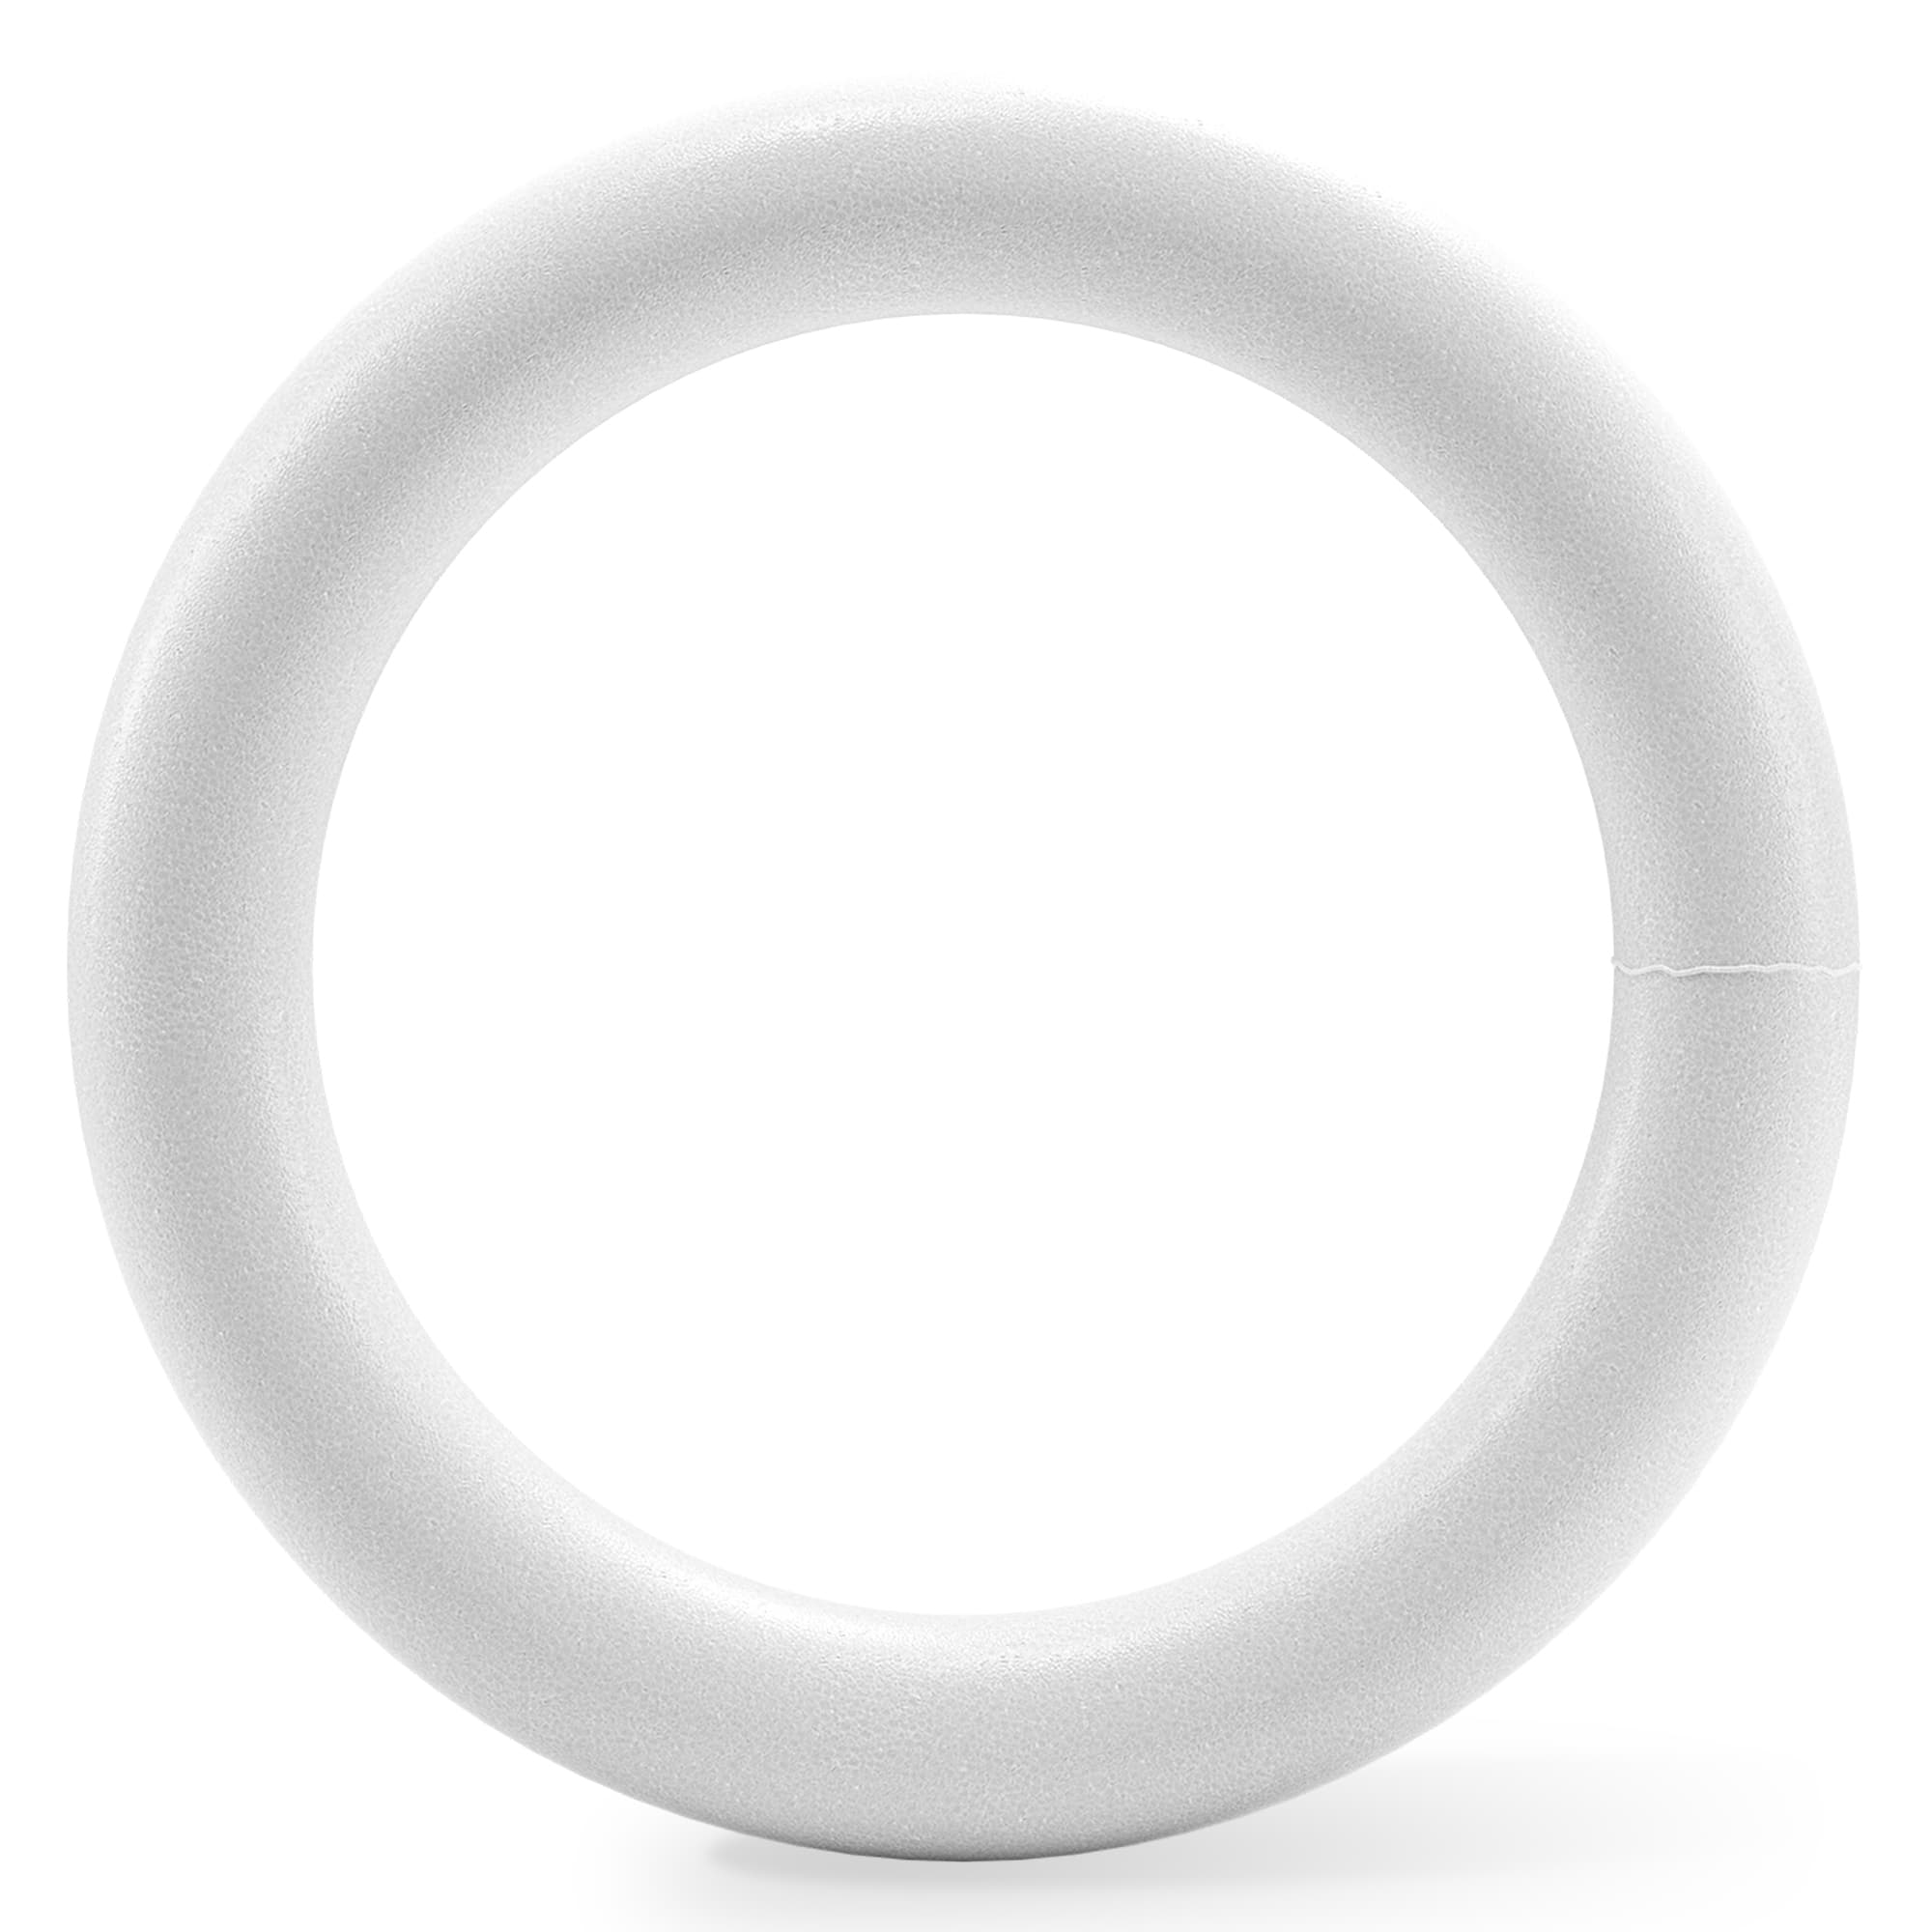 MAHIONG 30 Pack 4.7 Inch Craft Foam Wreath, White Polystyrene Foam Circles  Ring, Round Foam Wreath Form for Crafts DIY Arts Floral Projects Home